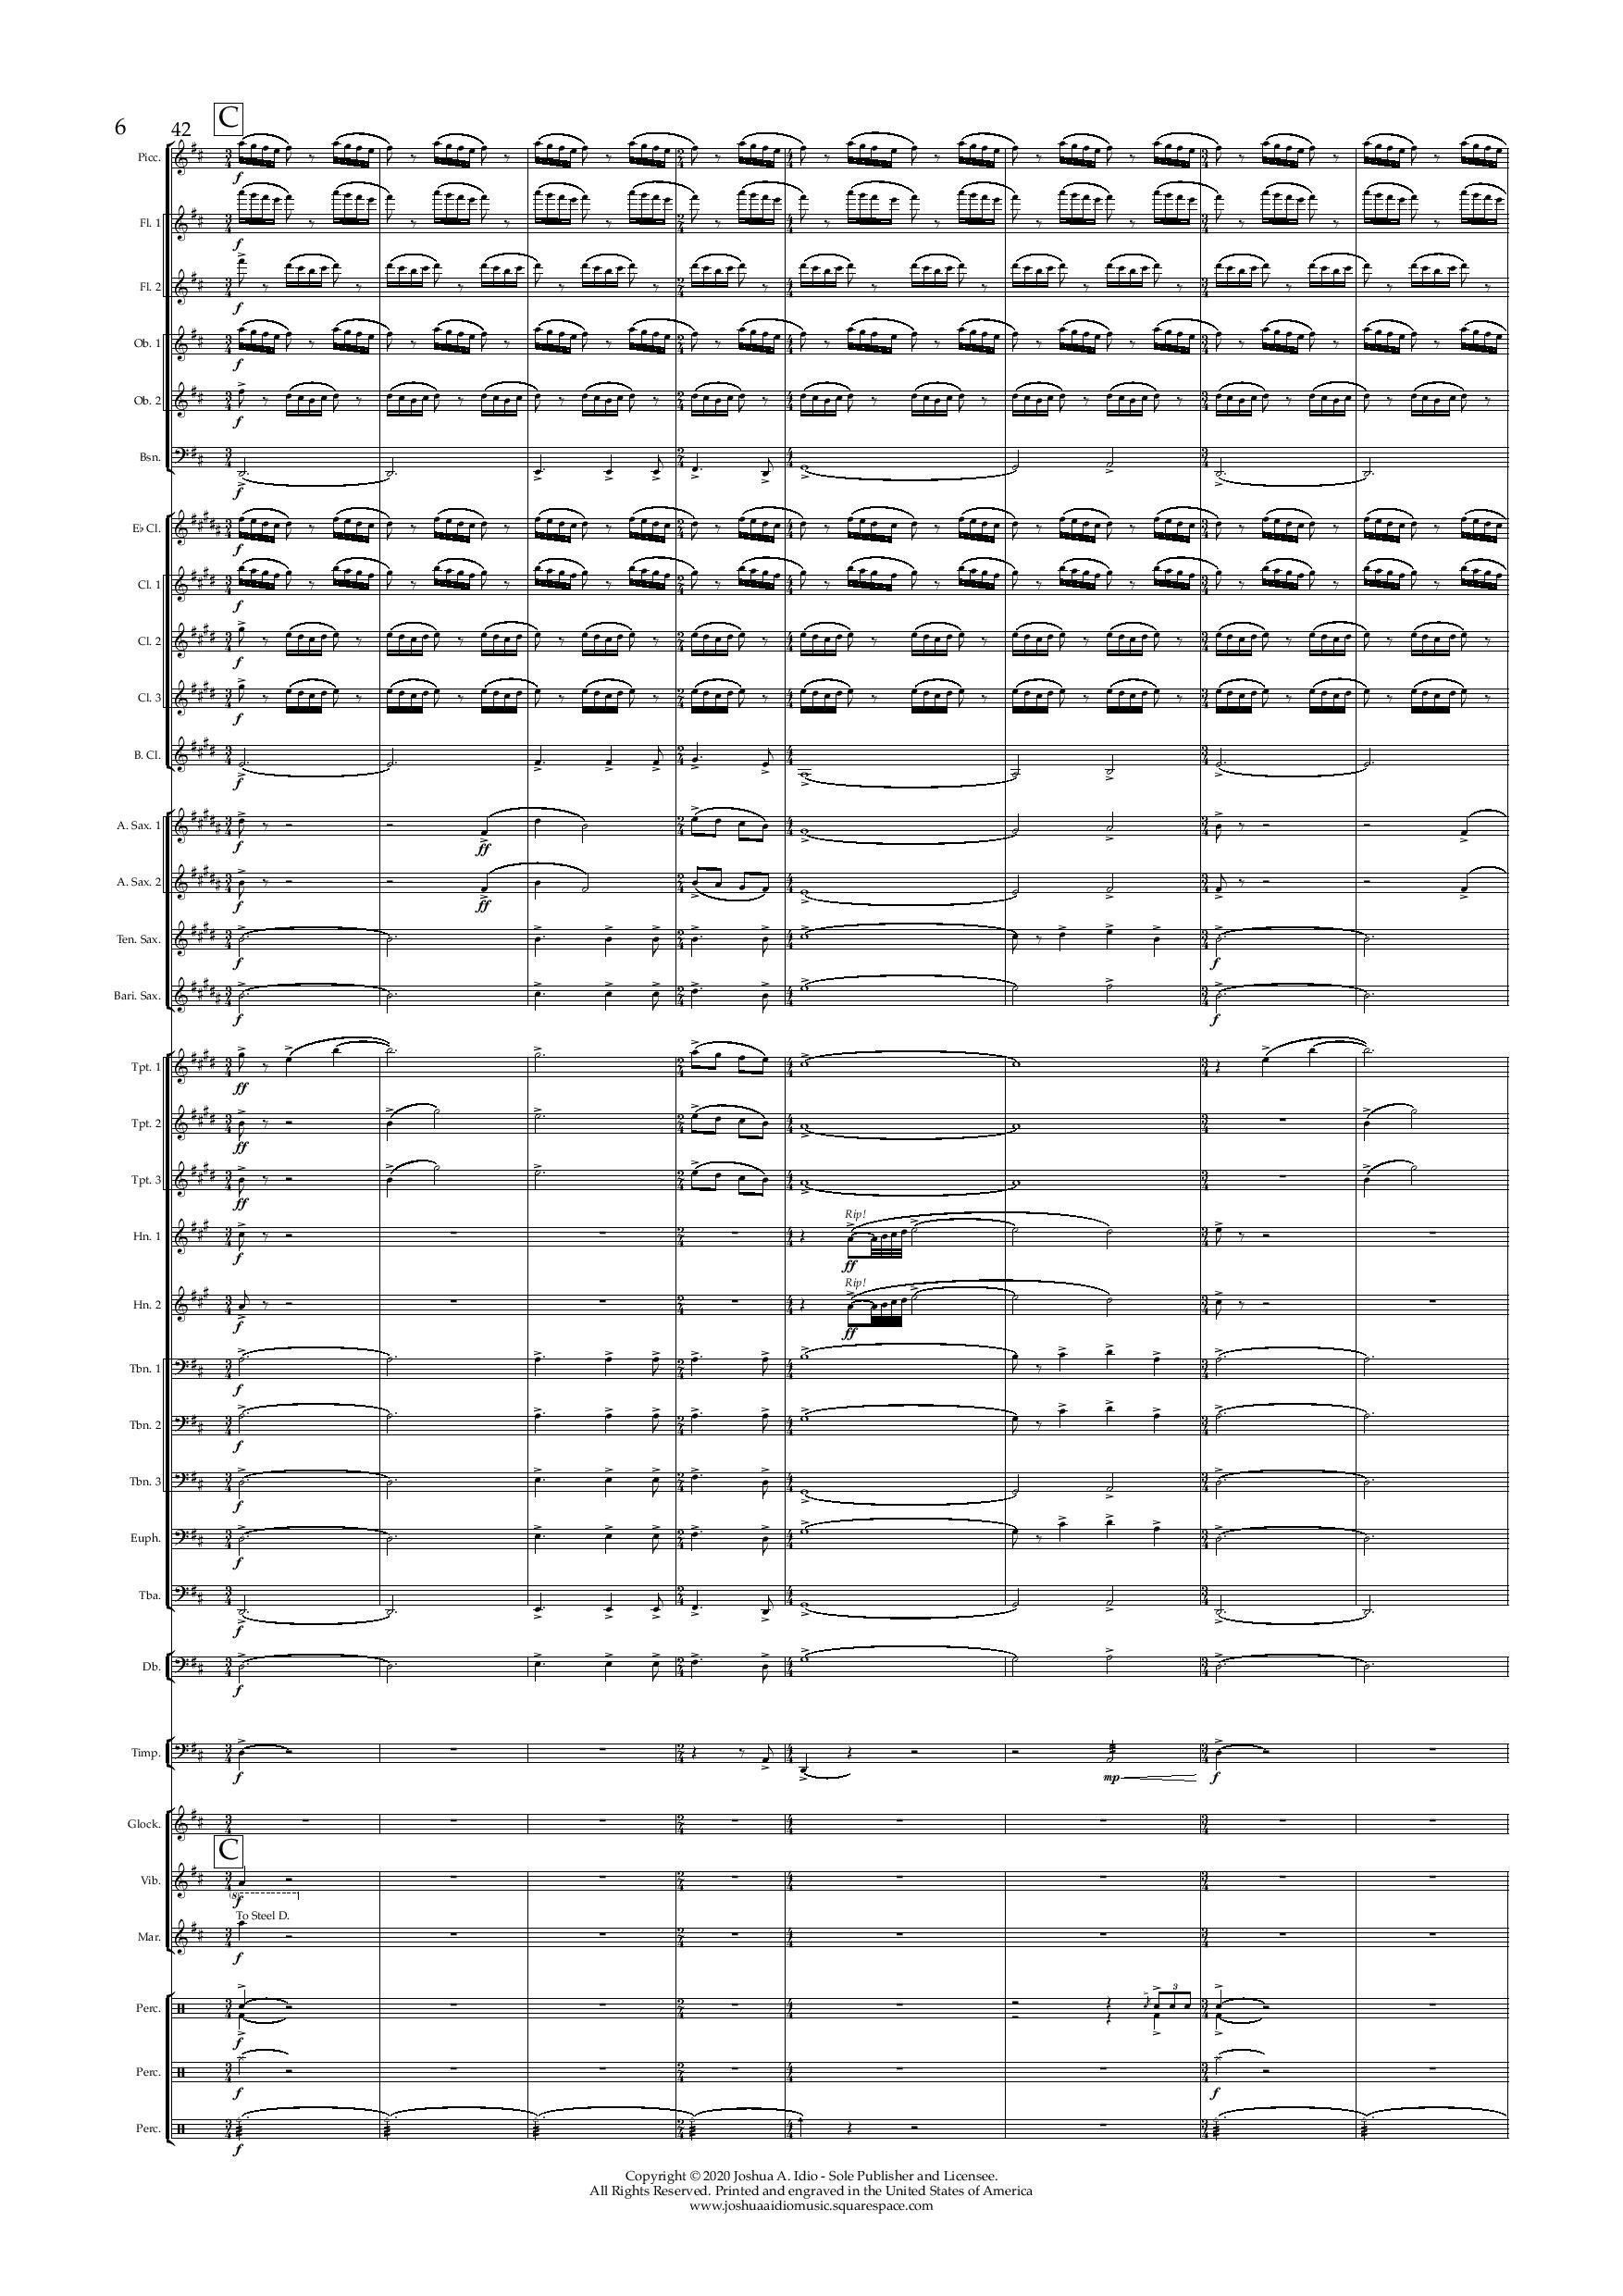 The Cruise Line Dream - Conductor s Score-page-006.jpg